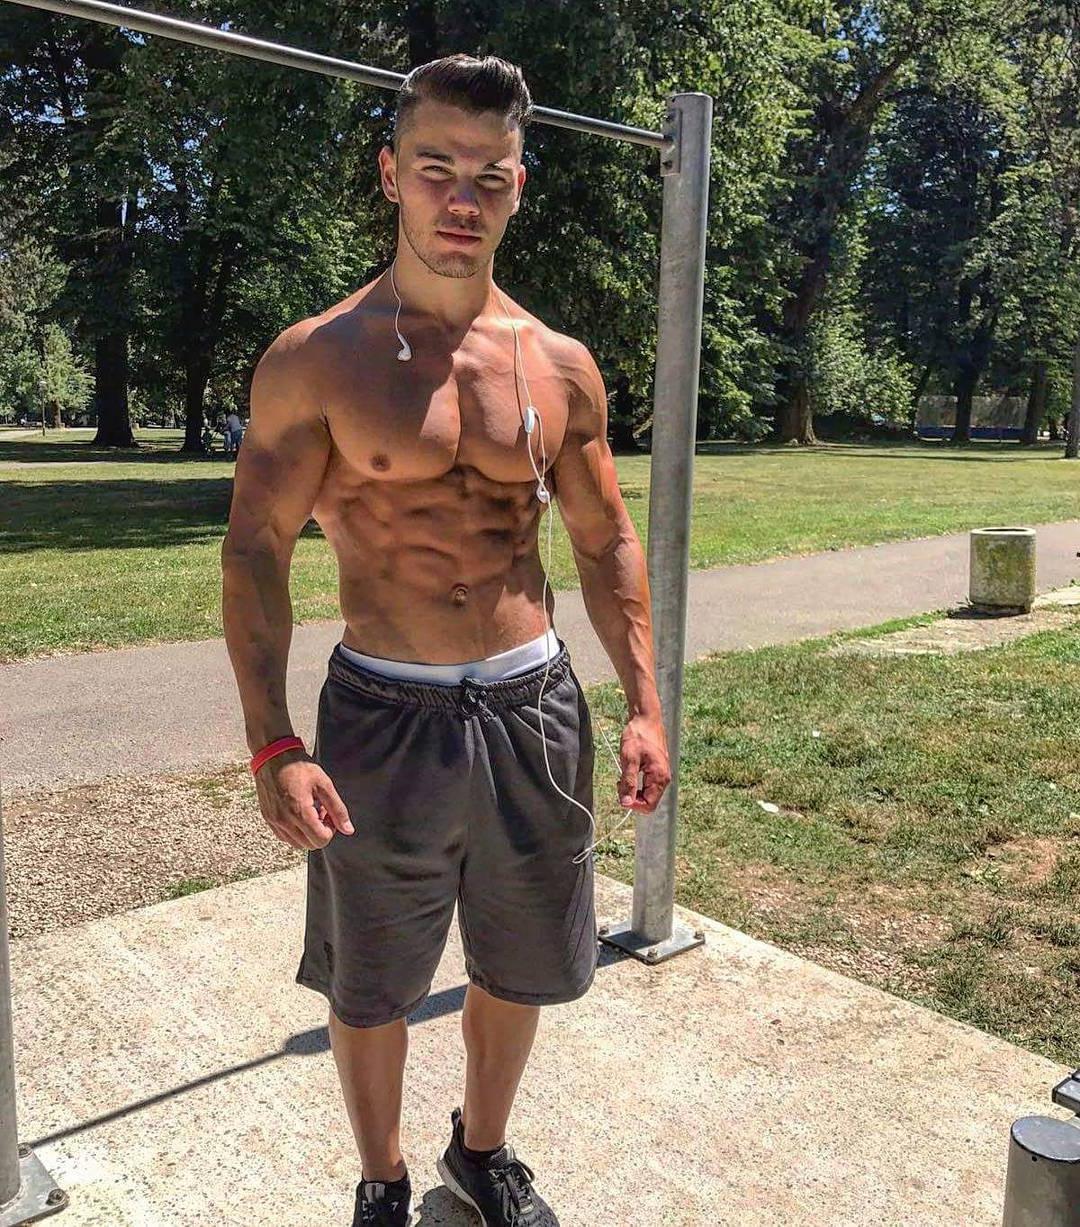 fit-shirtless-male-body-muscular-swole-dude-outdoor-gym-hunk-street-workout